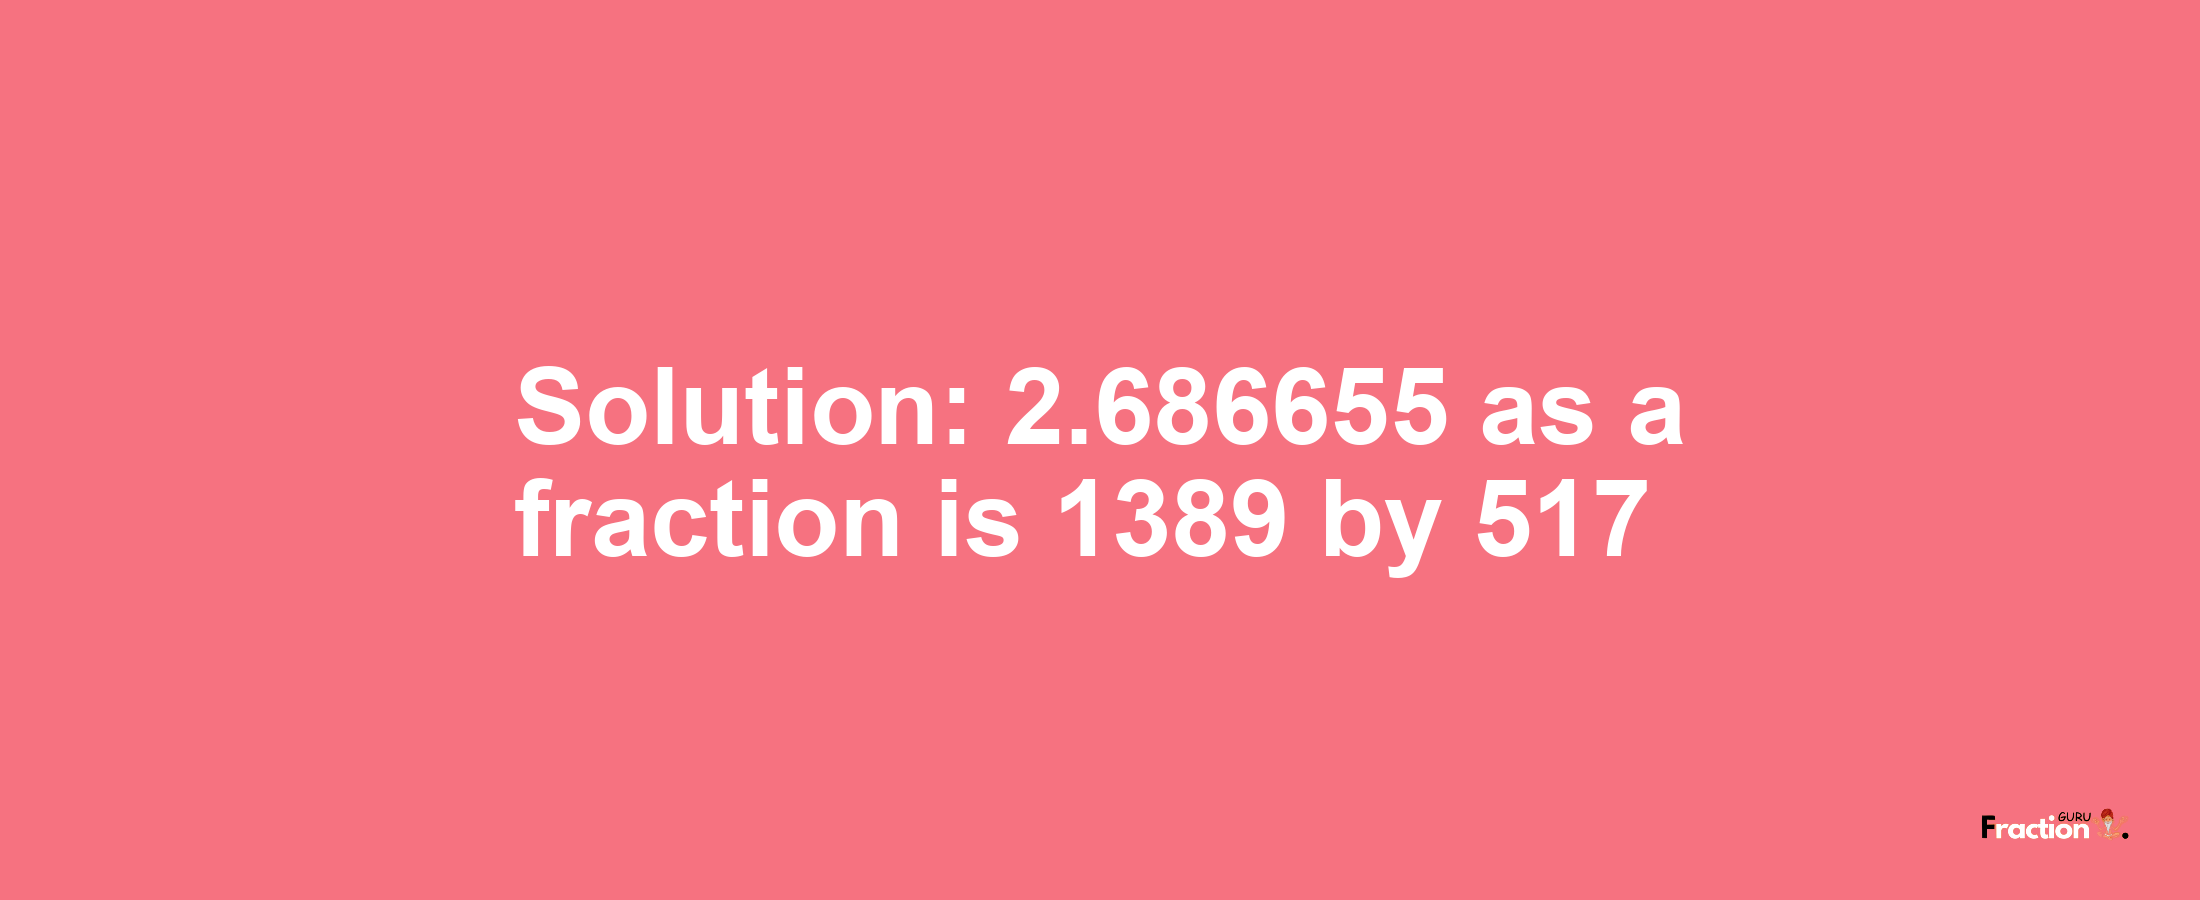 Solution:2.686655 as a fraction is 1389/517